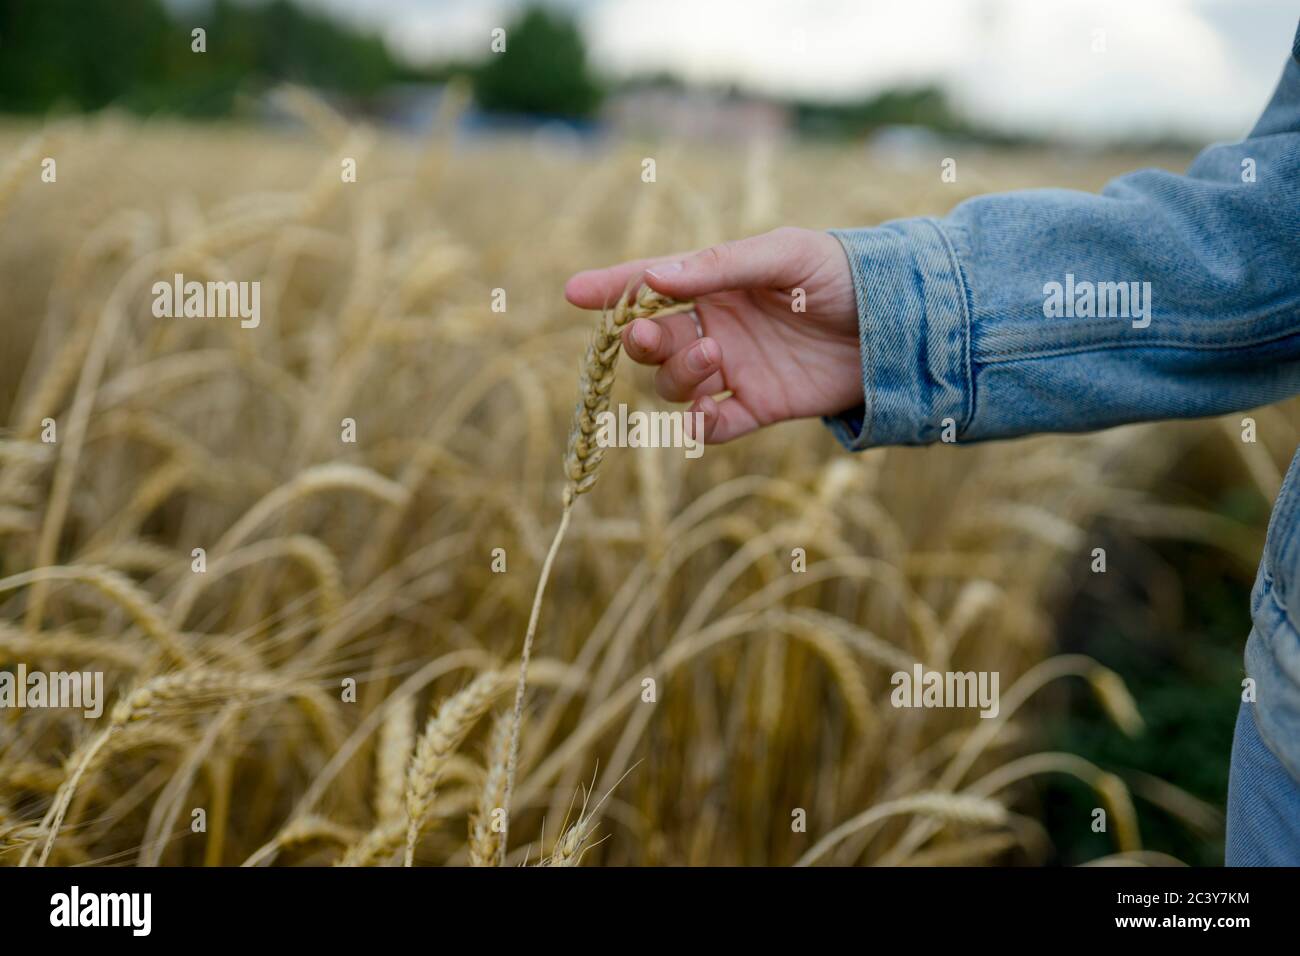 Russia, Omsk, Close up of woman's hand touching wheat ears in field Stock Photo